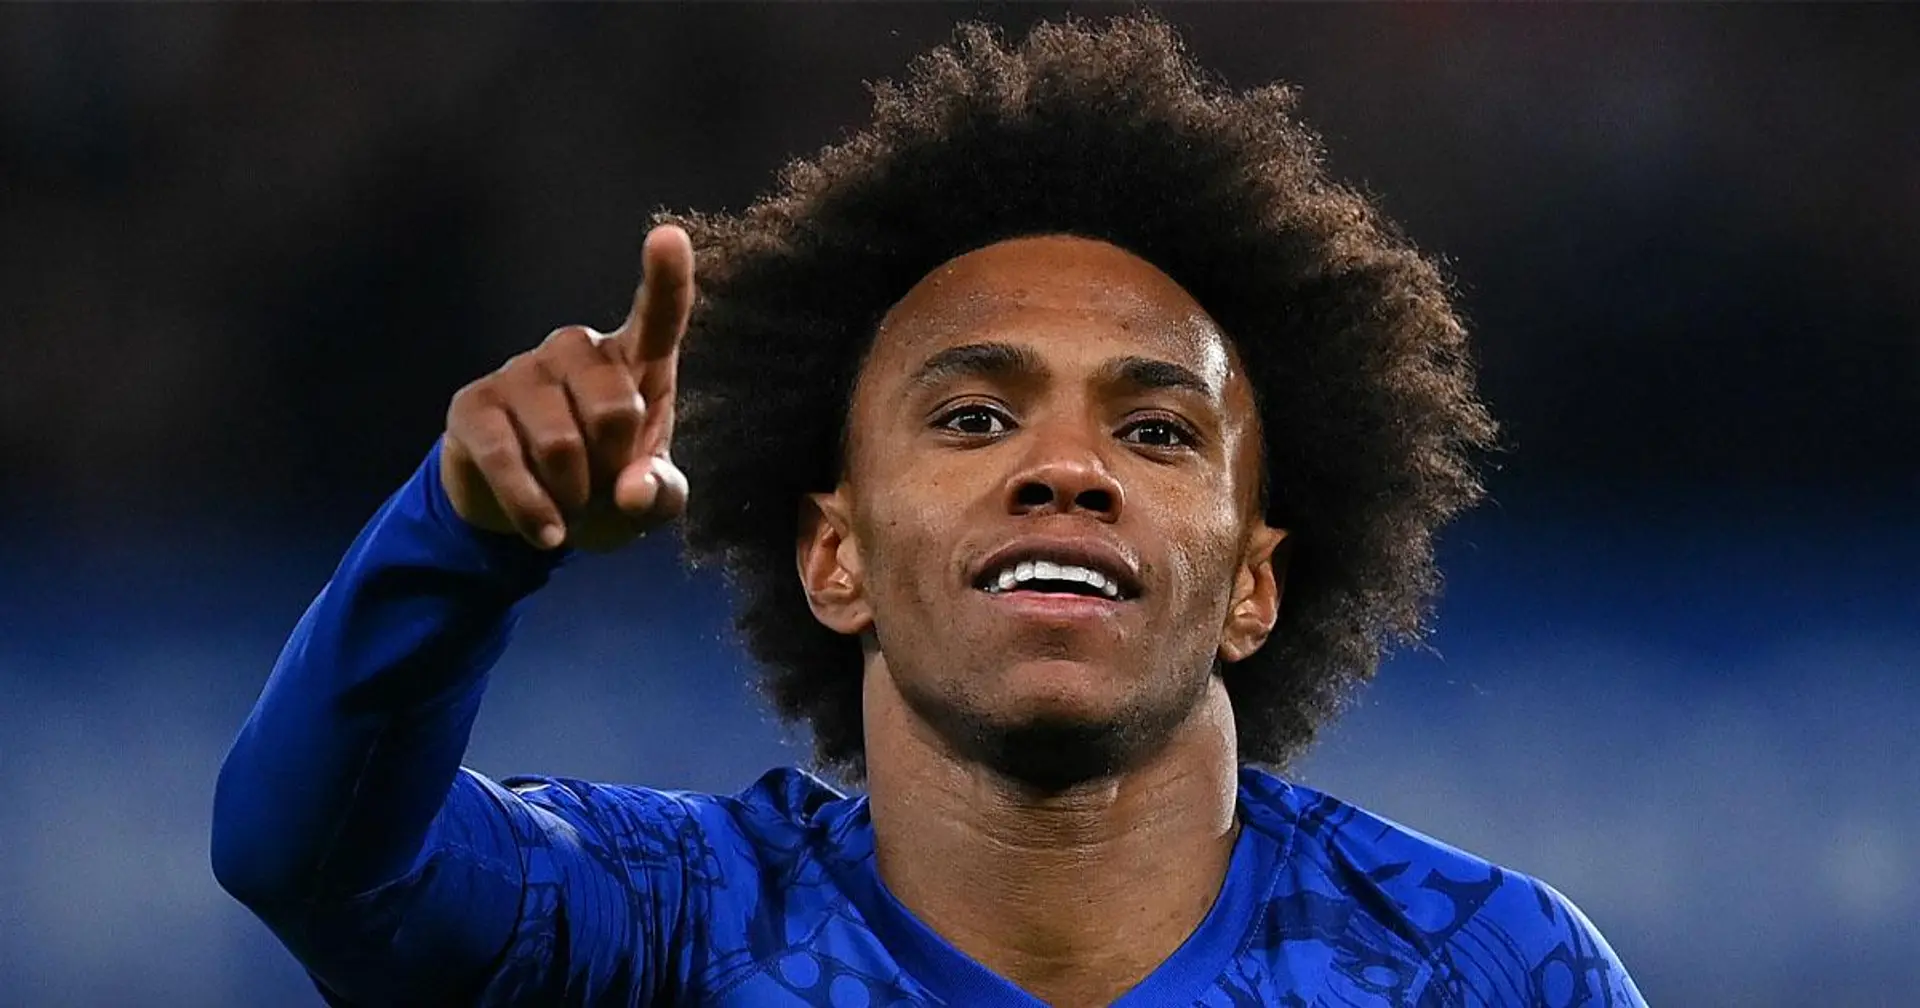 Sky Sports: Chelsea make breakthrough in contract talks with Willian, hopeful deal can be reached soon